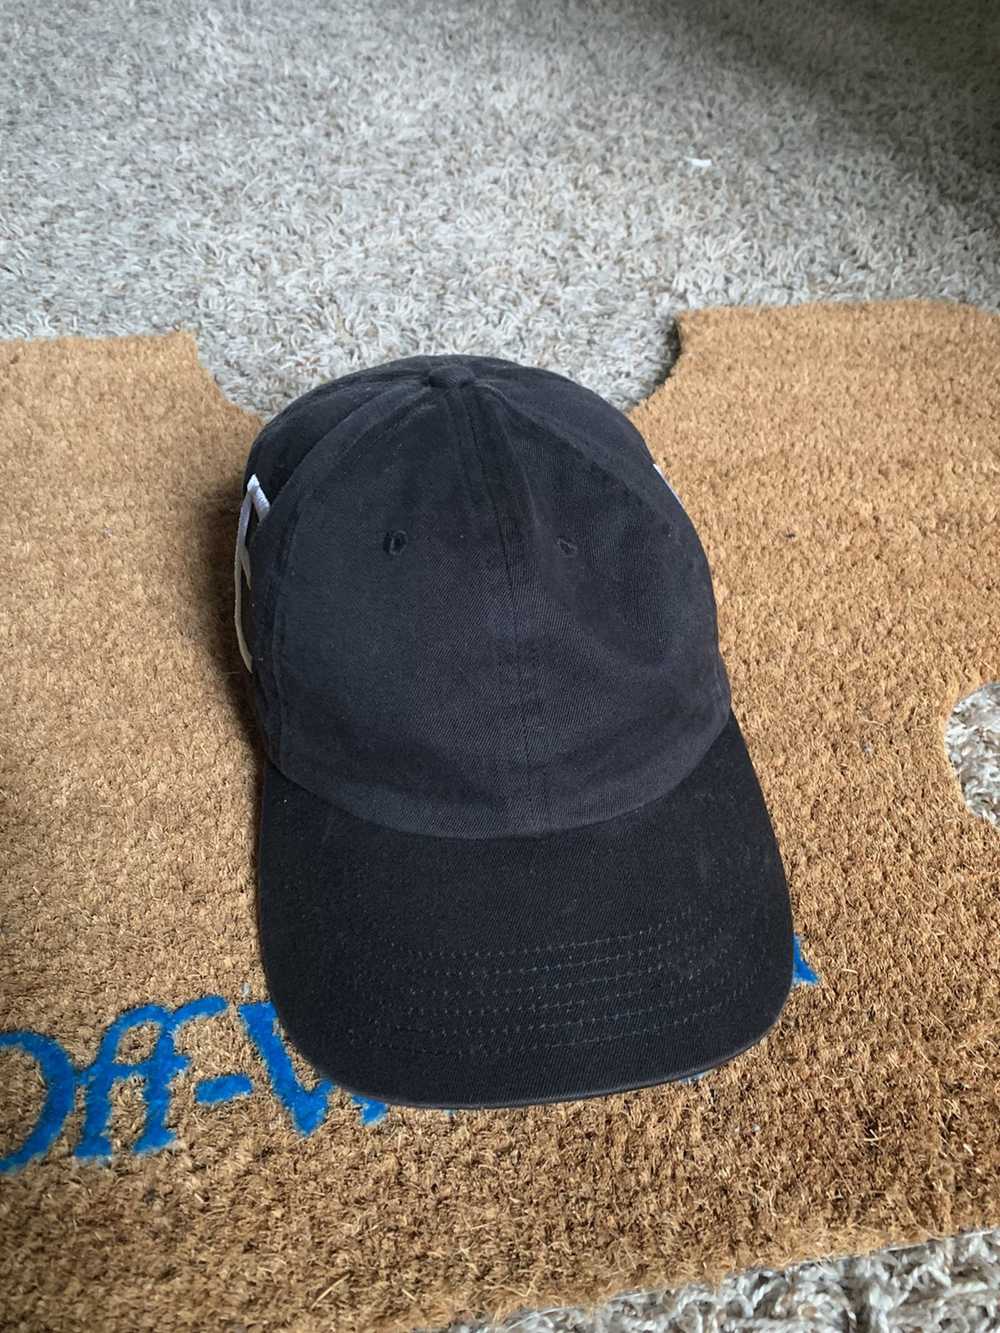 Supreme Supreme rear spell out hat - image 2